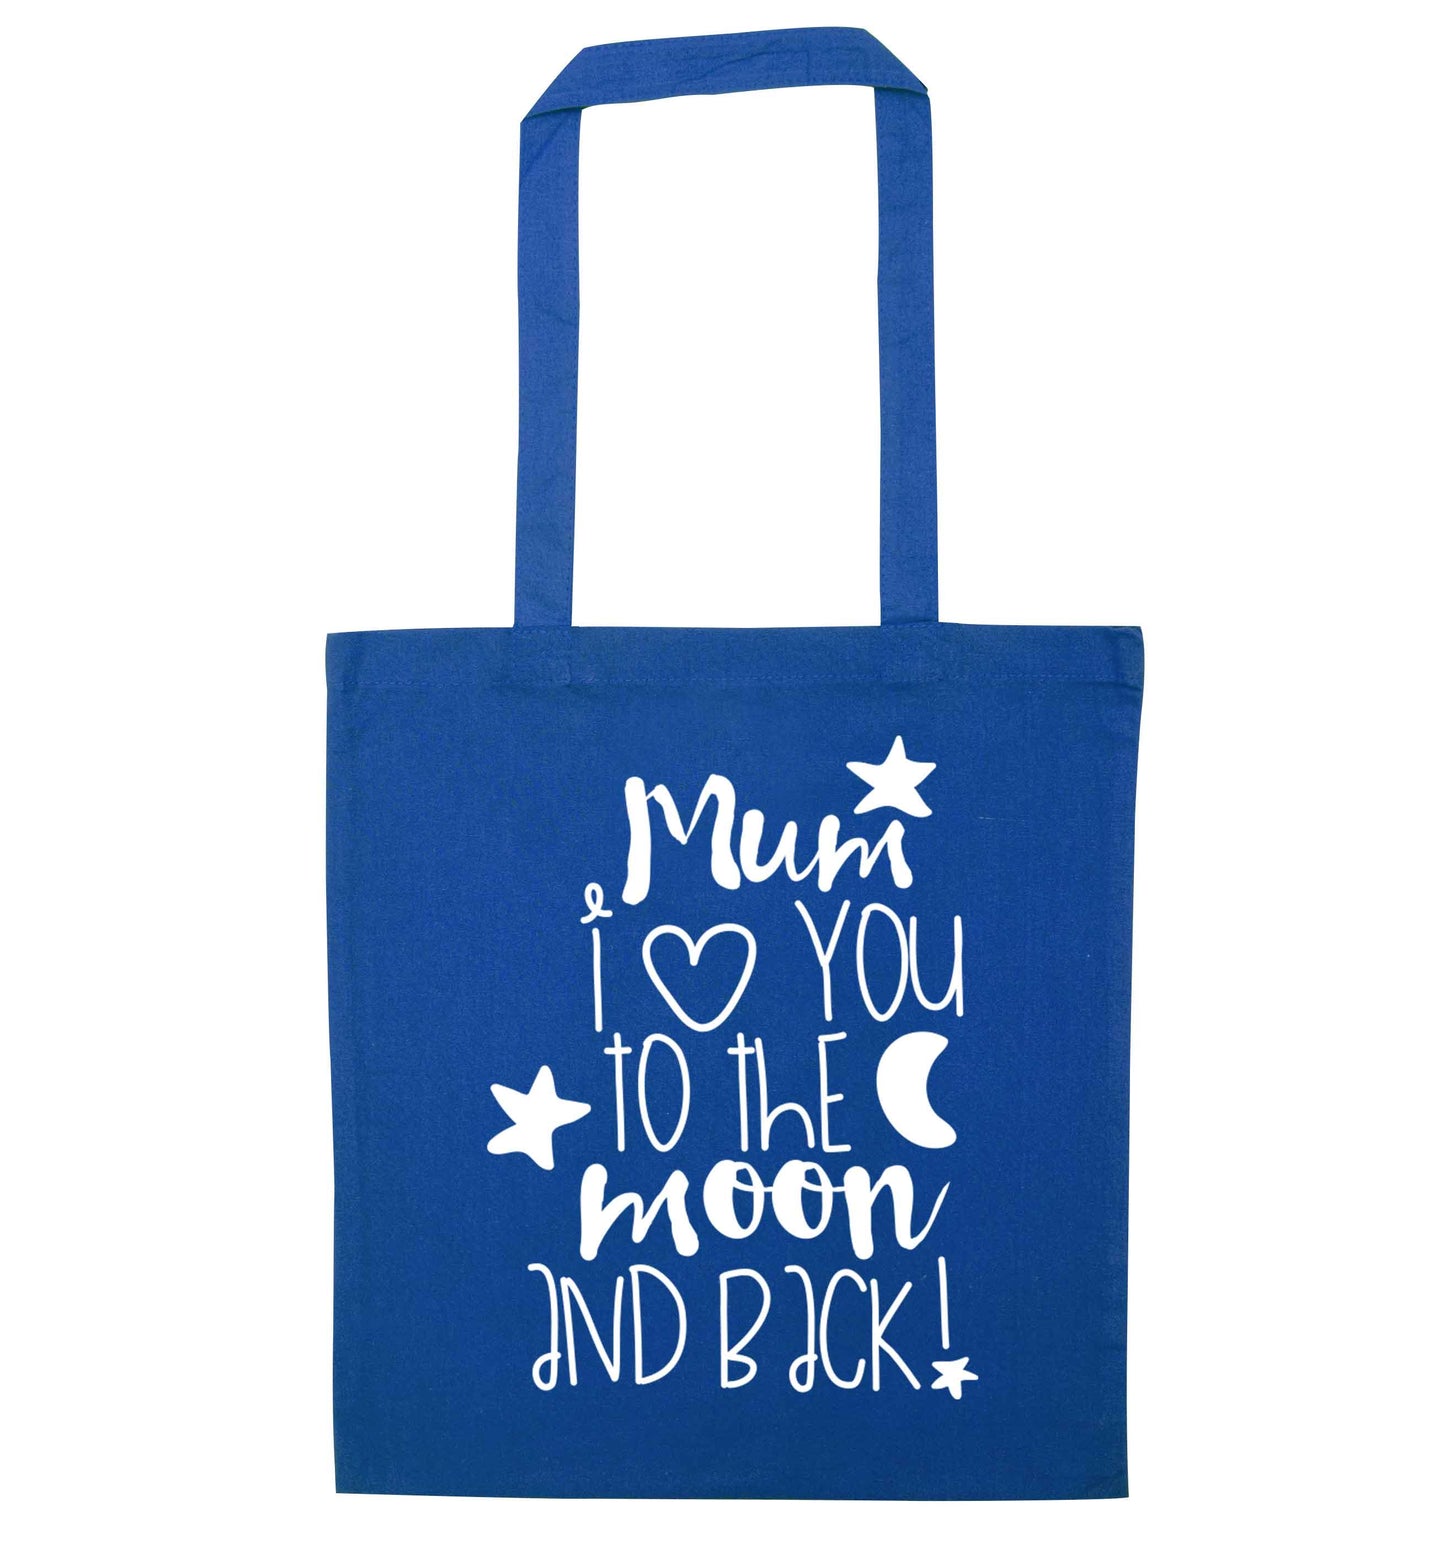 Mum I love you to the moon and back blue tote bag